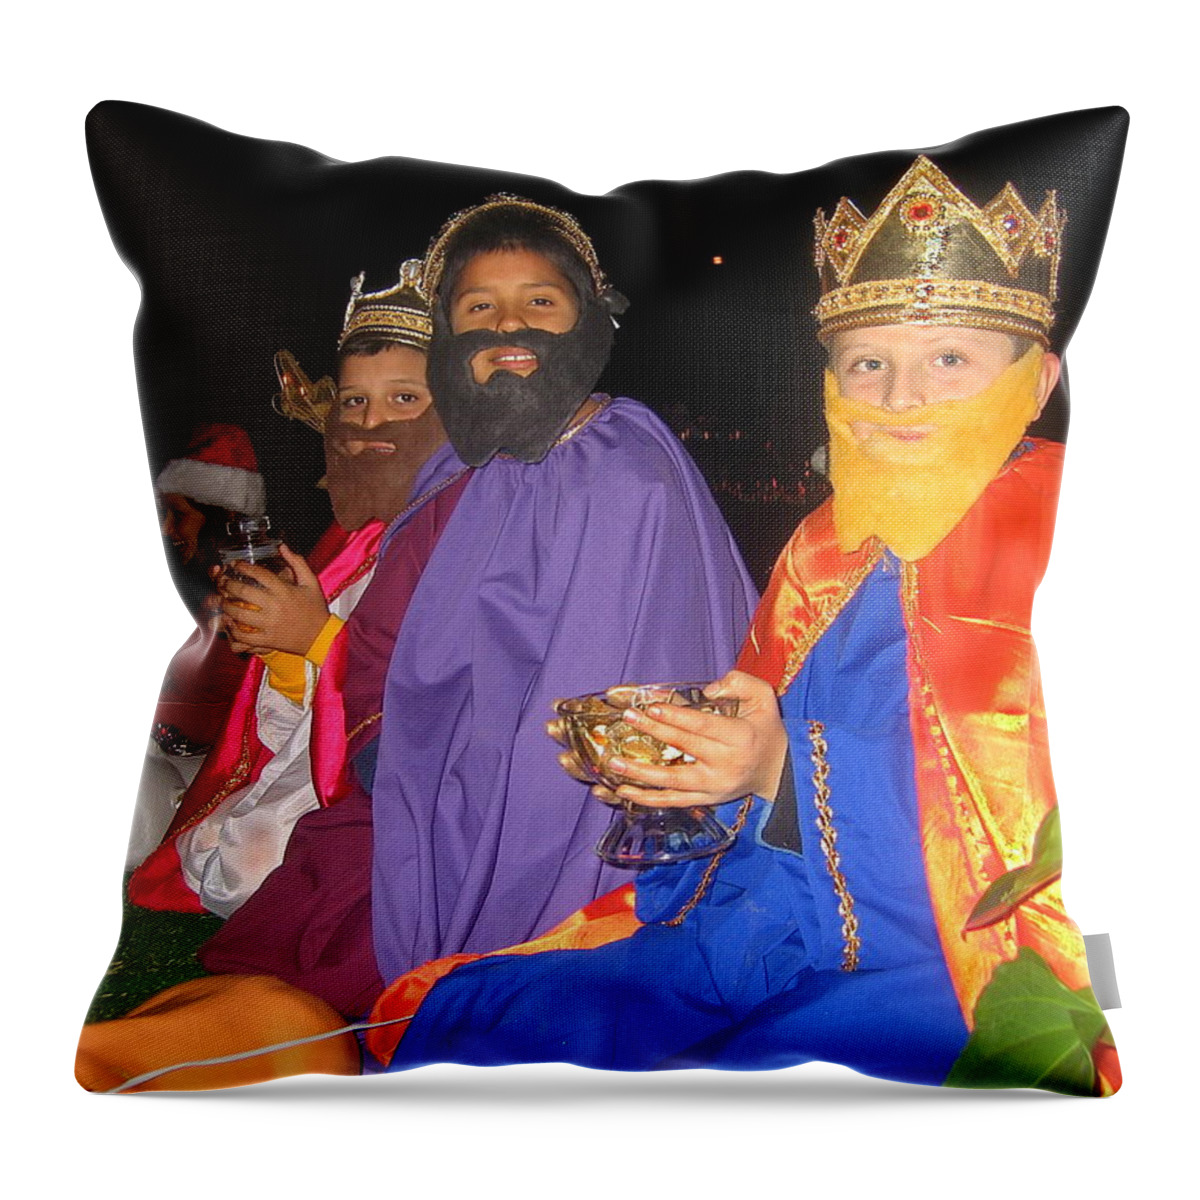 Three Wise Men On Float Christmas Parade Eloy Arizona 2005 Throw Pillow featuring the photograph Three wise men on float Christmas parade Eloy Arizona 2005 by David Lee Guss